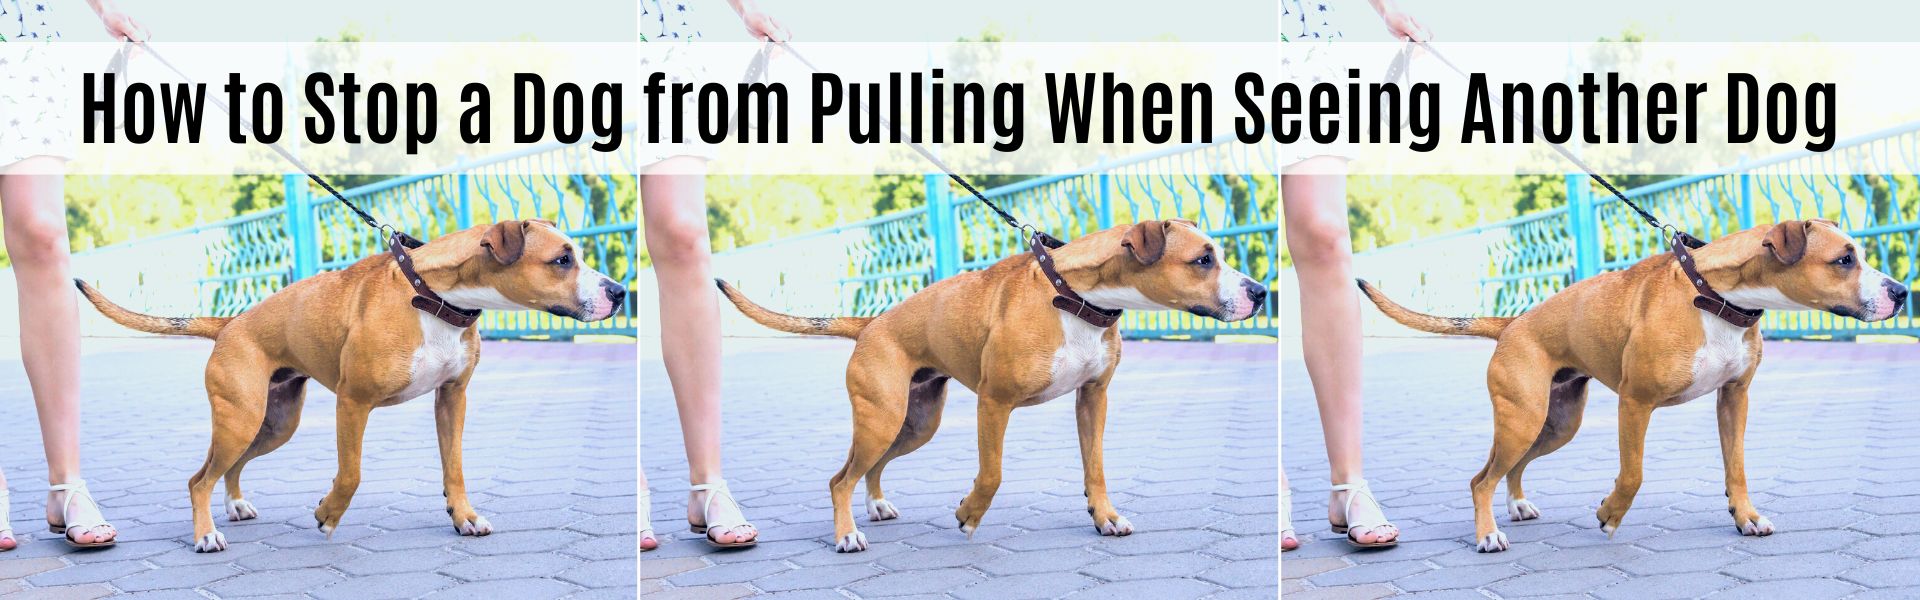 How to stop a dog from pulling when seeing another dog